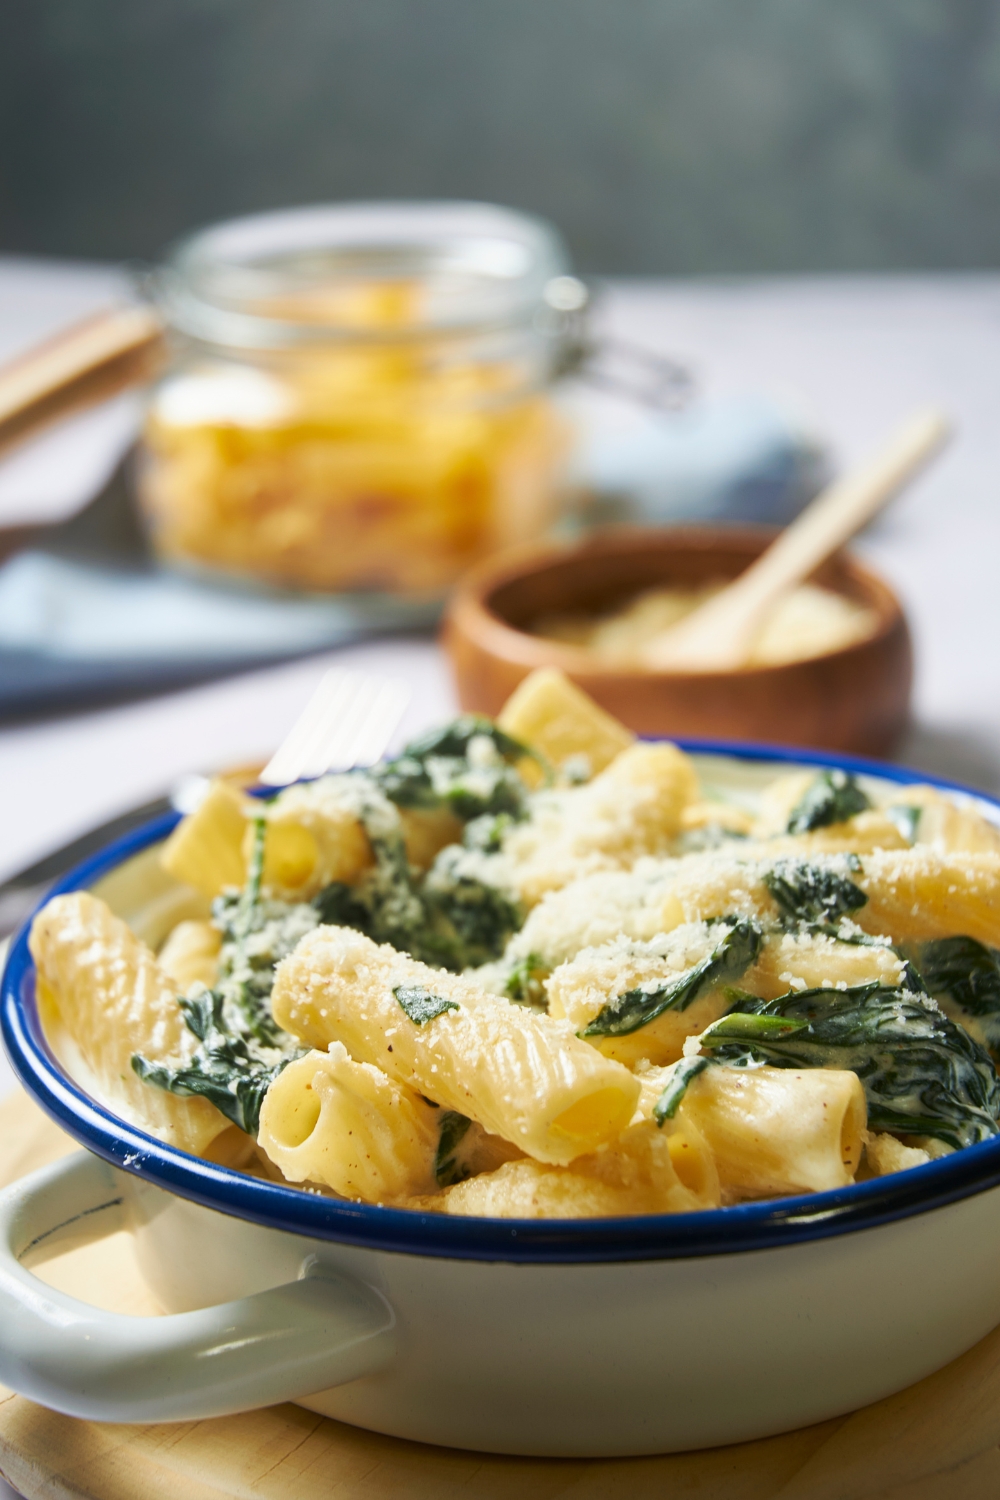 A bowl with spinach pasta topped with parmesan cheese. The bowl is placed on a wooden serving plate.